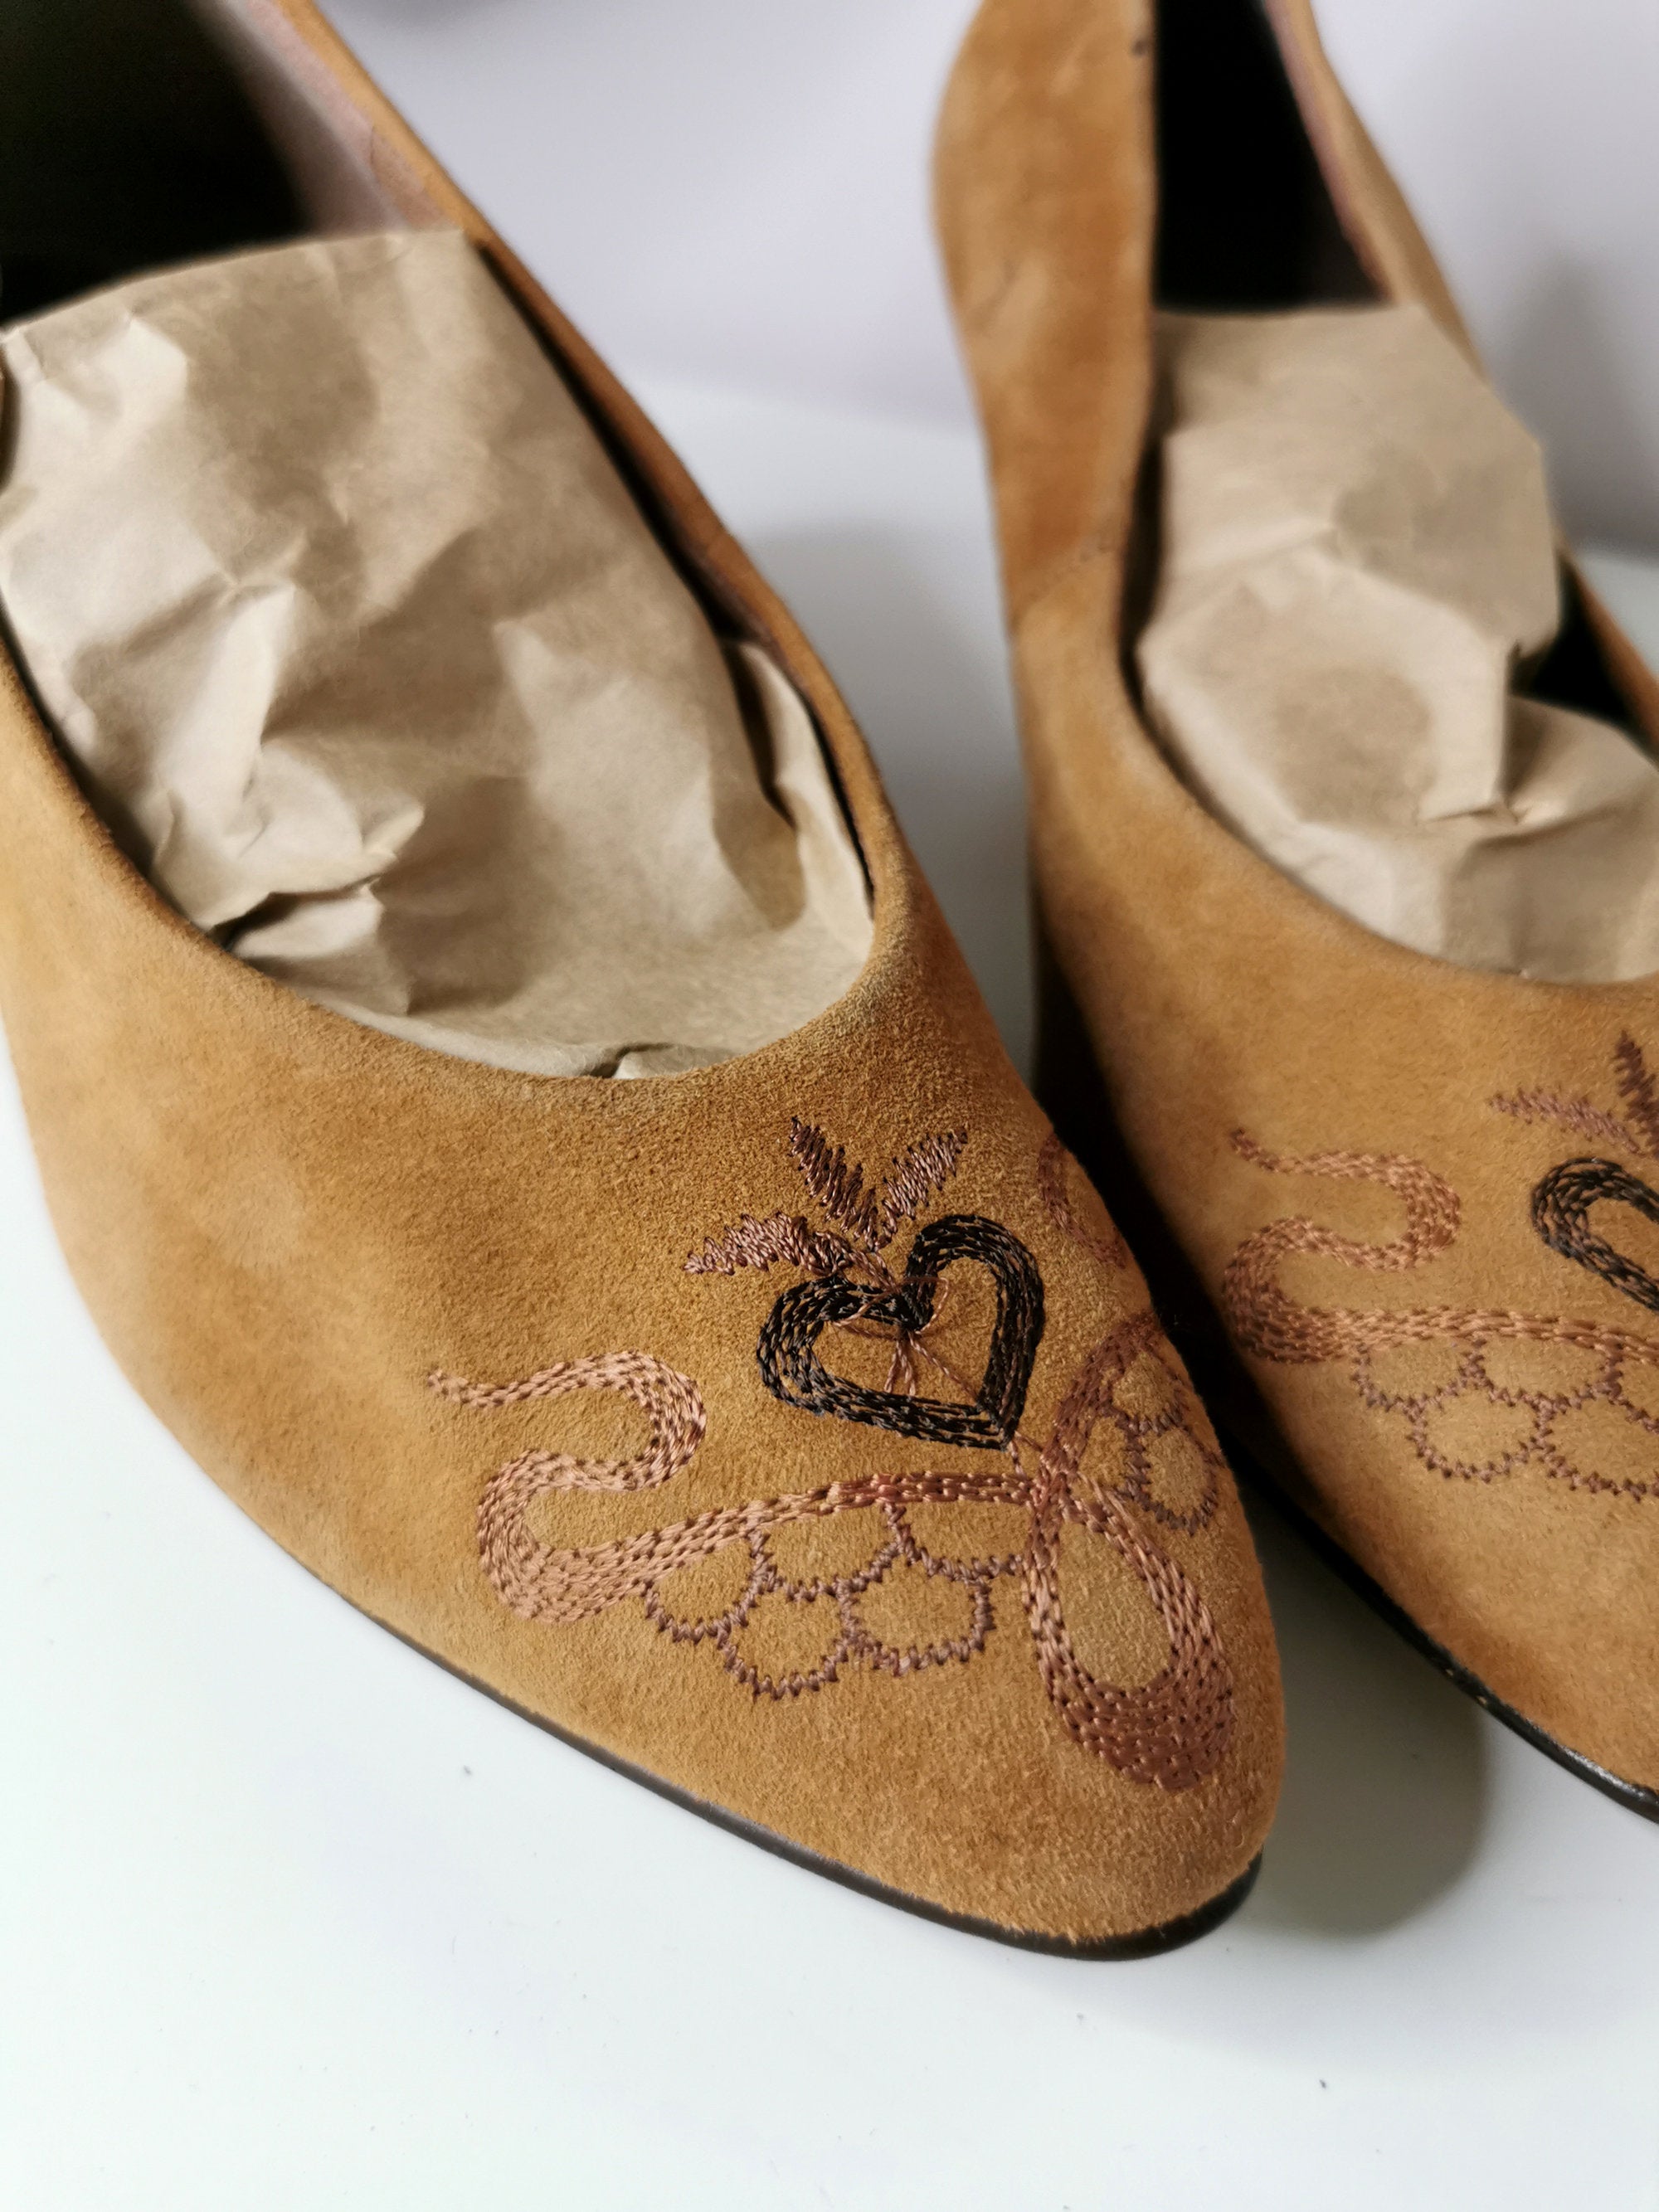 Vintage 80s suede brown embroidered pumps shoes